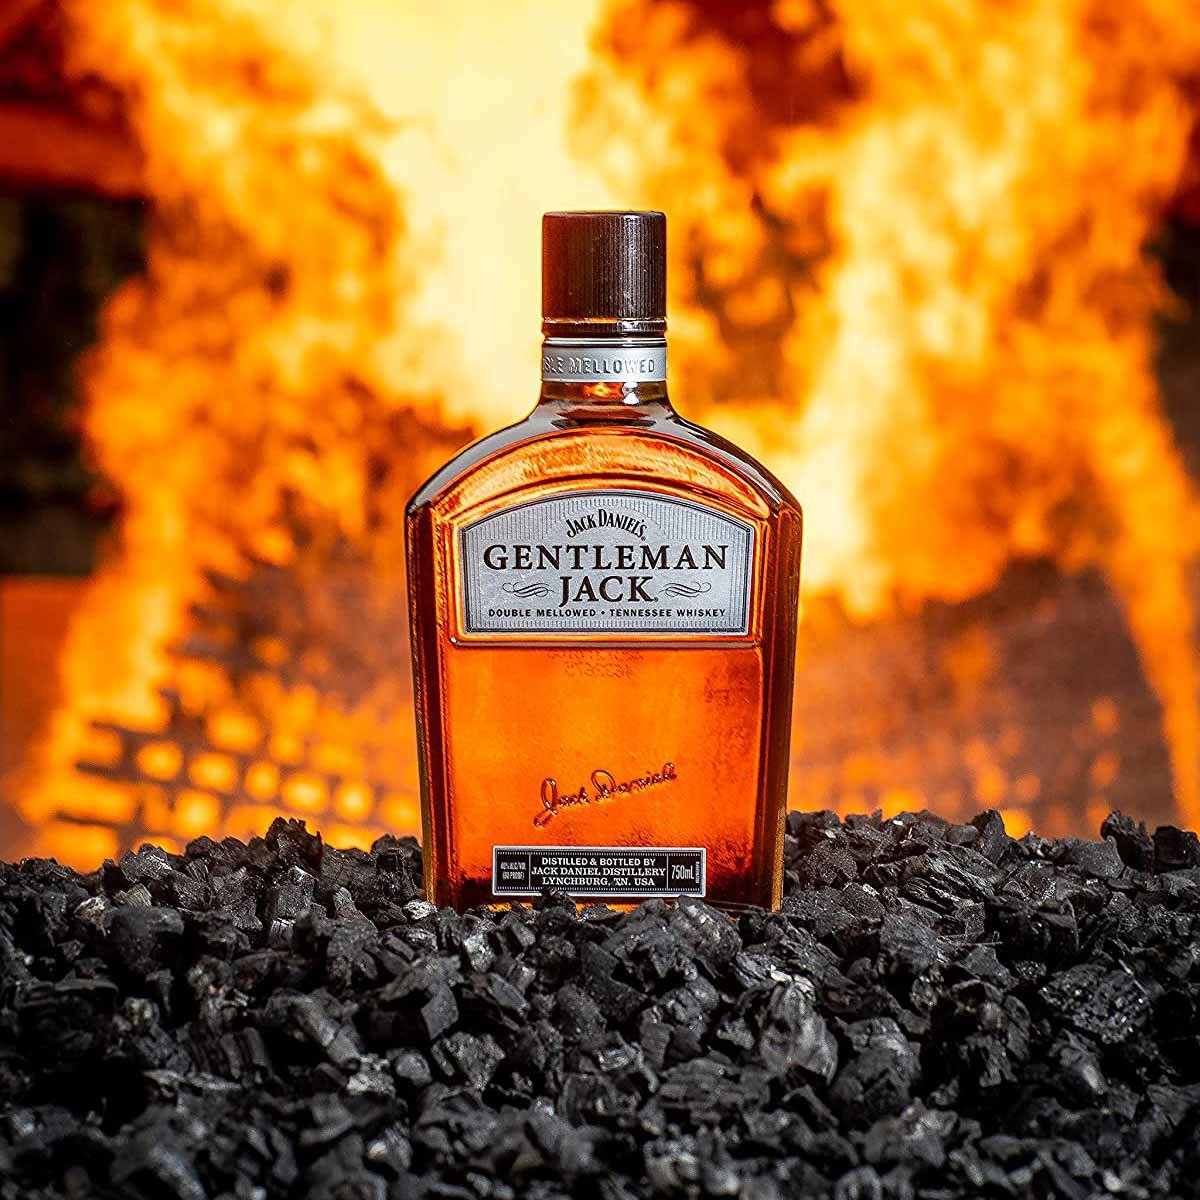 Lifestyle image of bottle resting on charcoal infront of flame